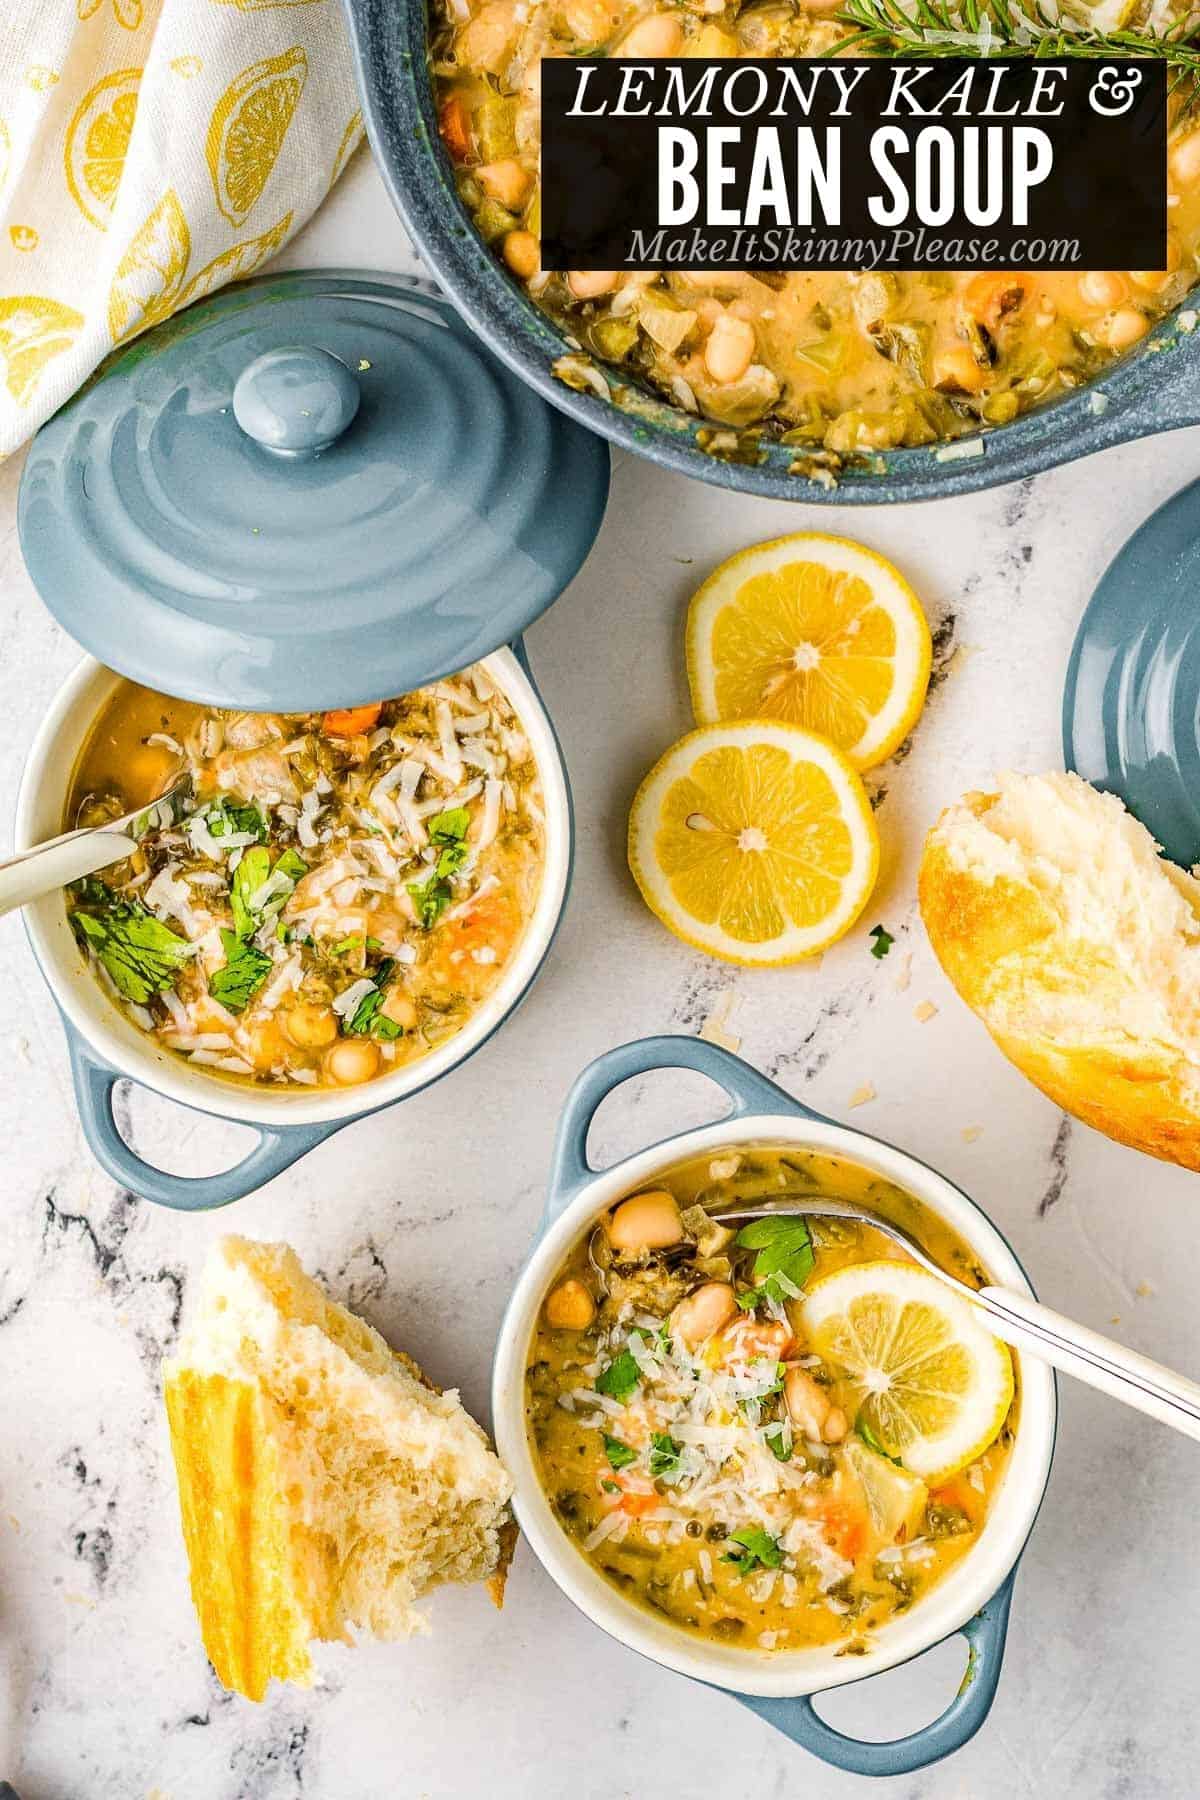 lemony kale and bean soup with text overlay